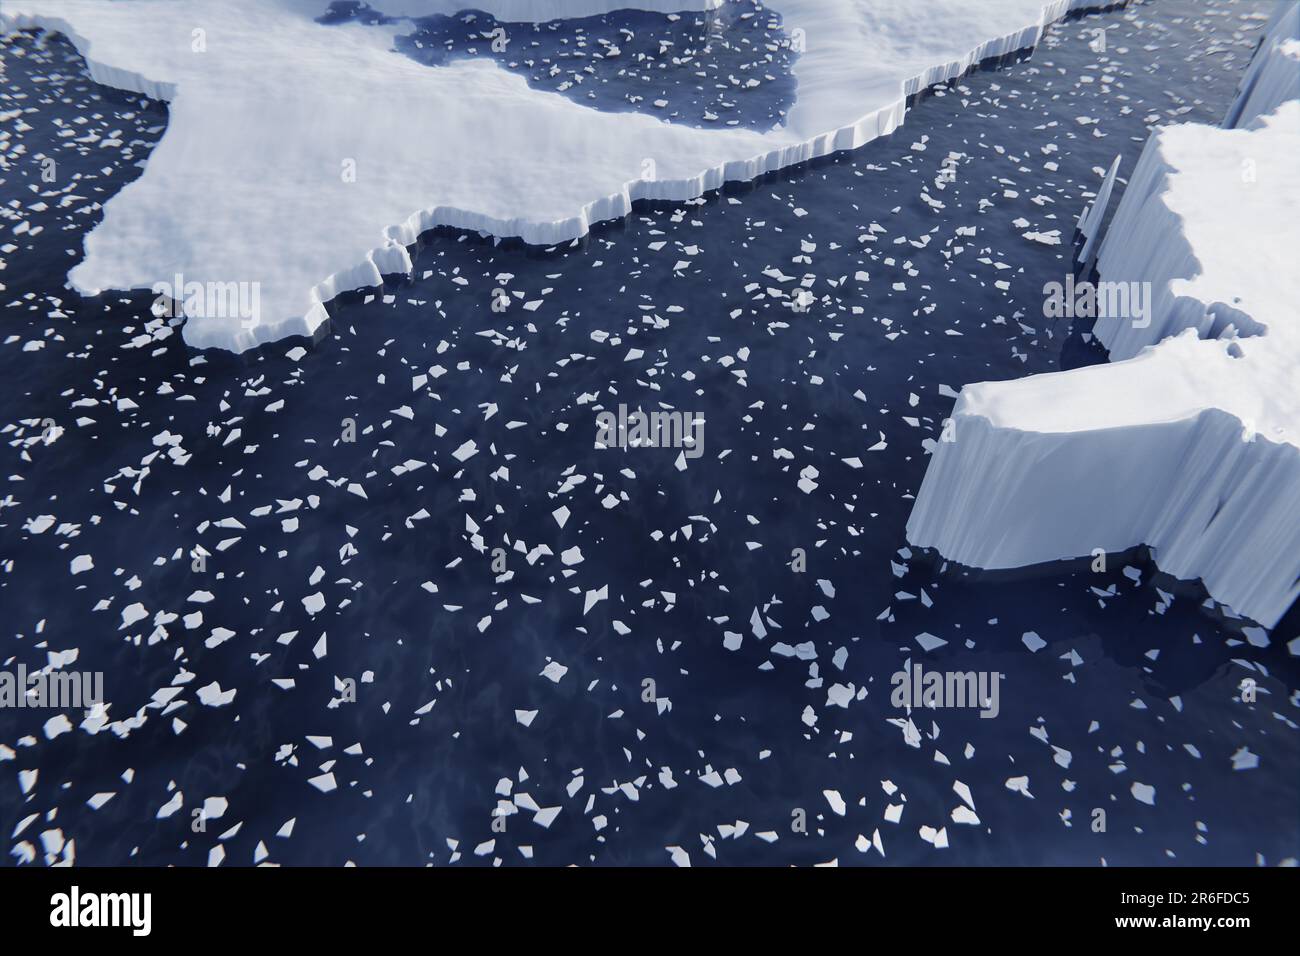 melting glacier. Melting arctic ice. Global warming and climate change concept. Affected by climate change and global warming. Tabular icebergs meltin Stock Photo